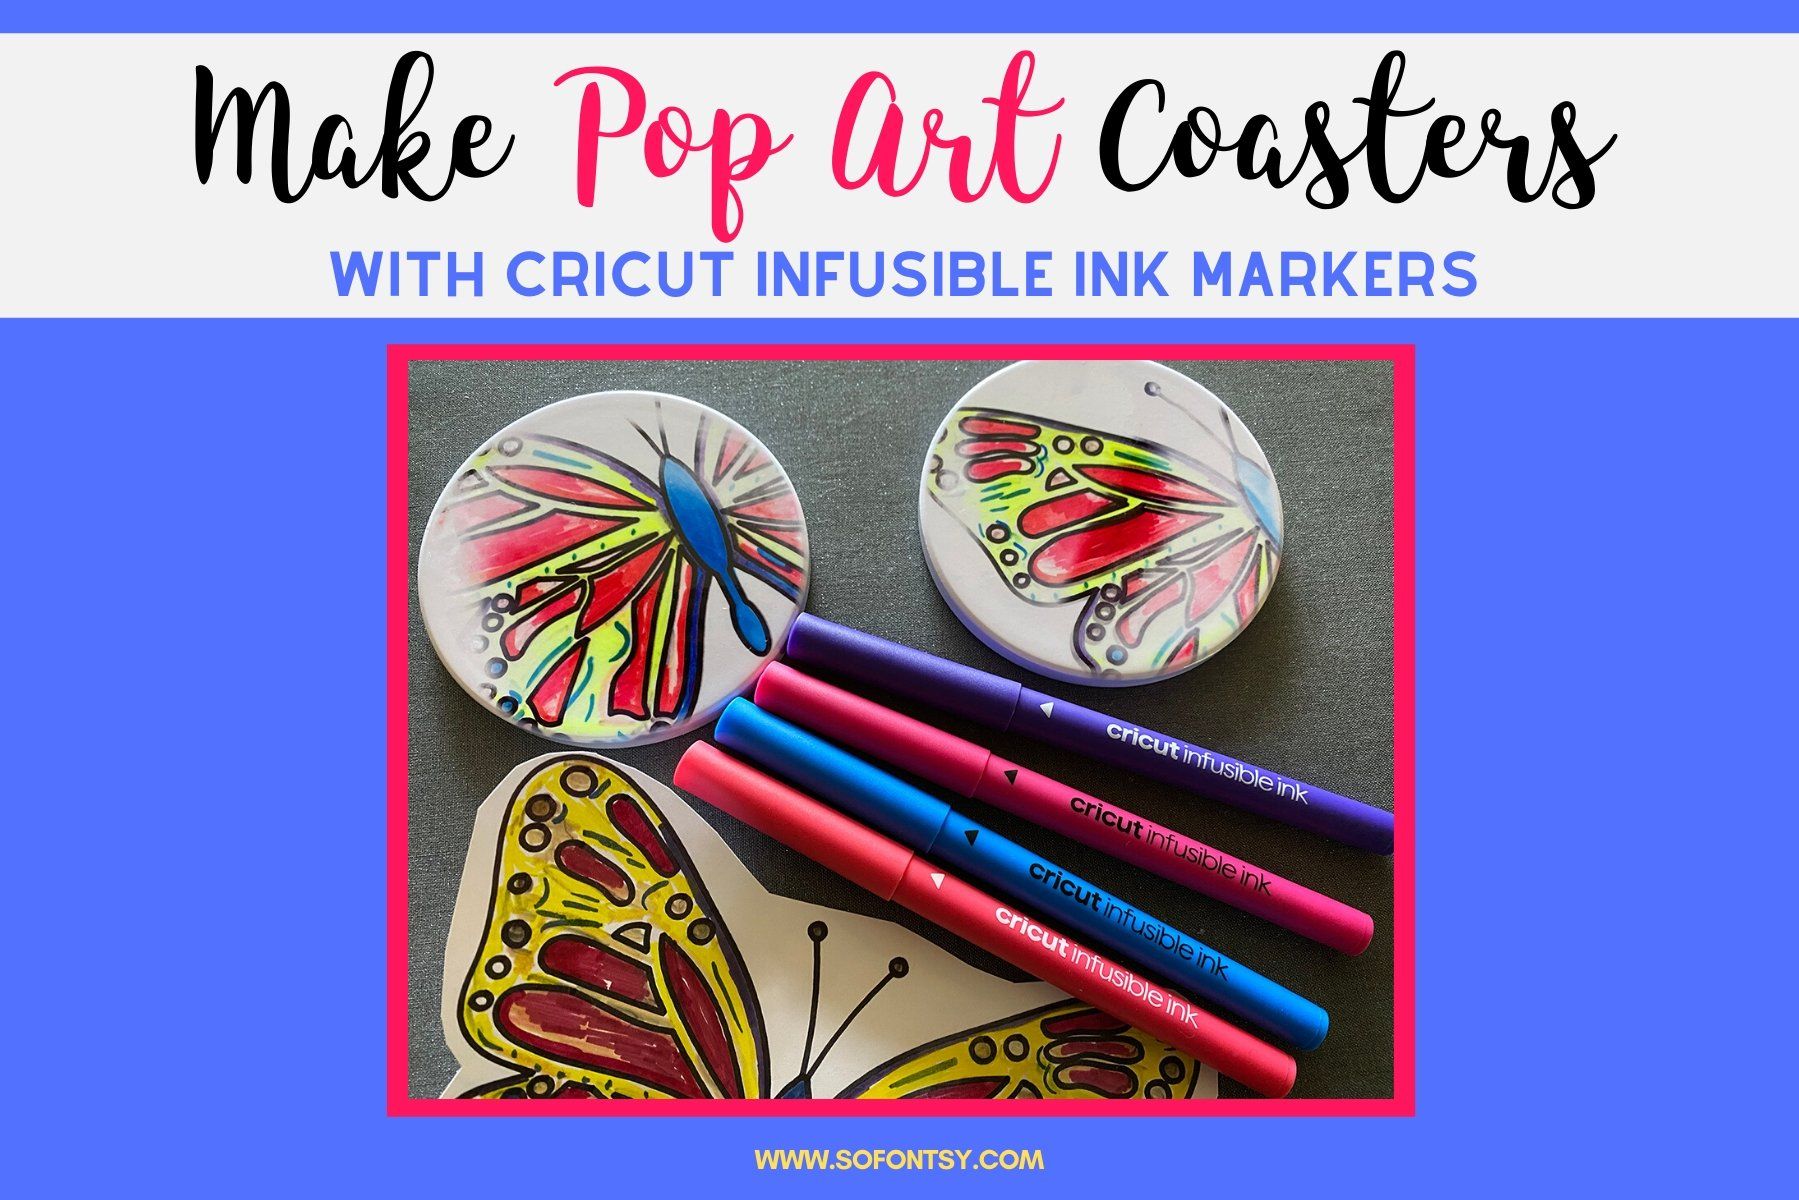 Cricut Infusible Ink Markers Tutorial: Make Pop Art Coasters - So